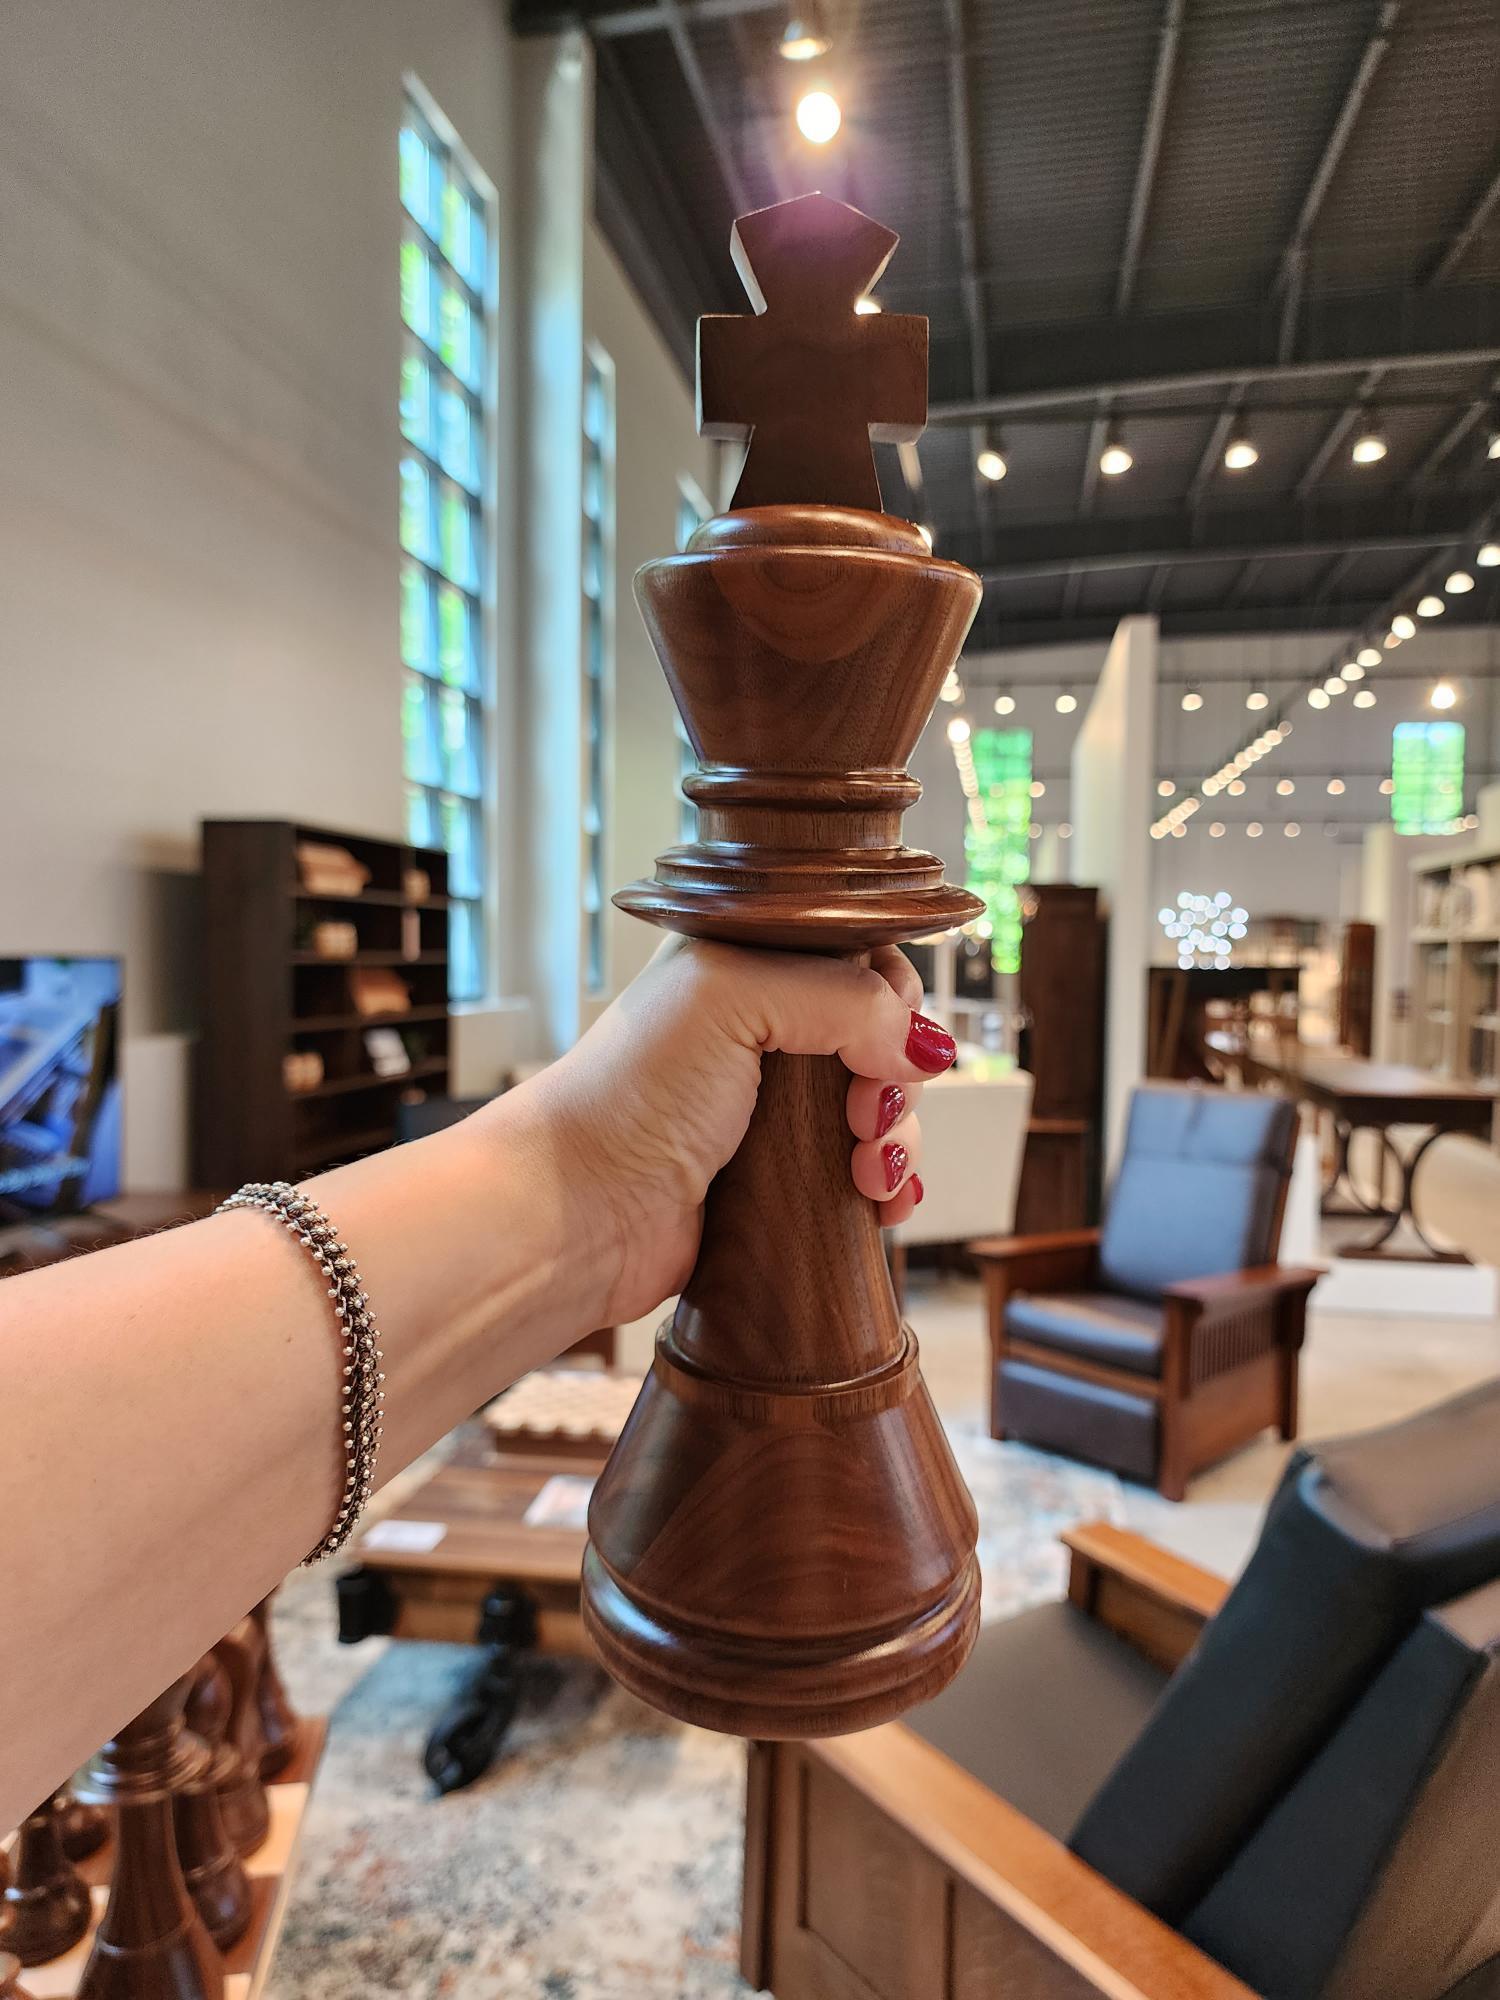 Large Chess Piece Set Wood, Large Wooden Chess Pieces